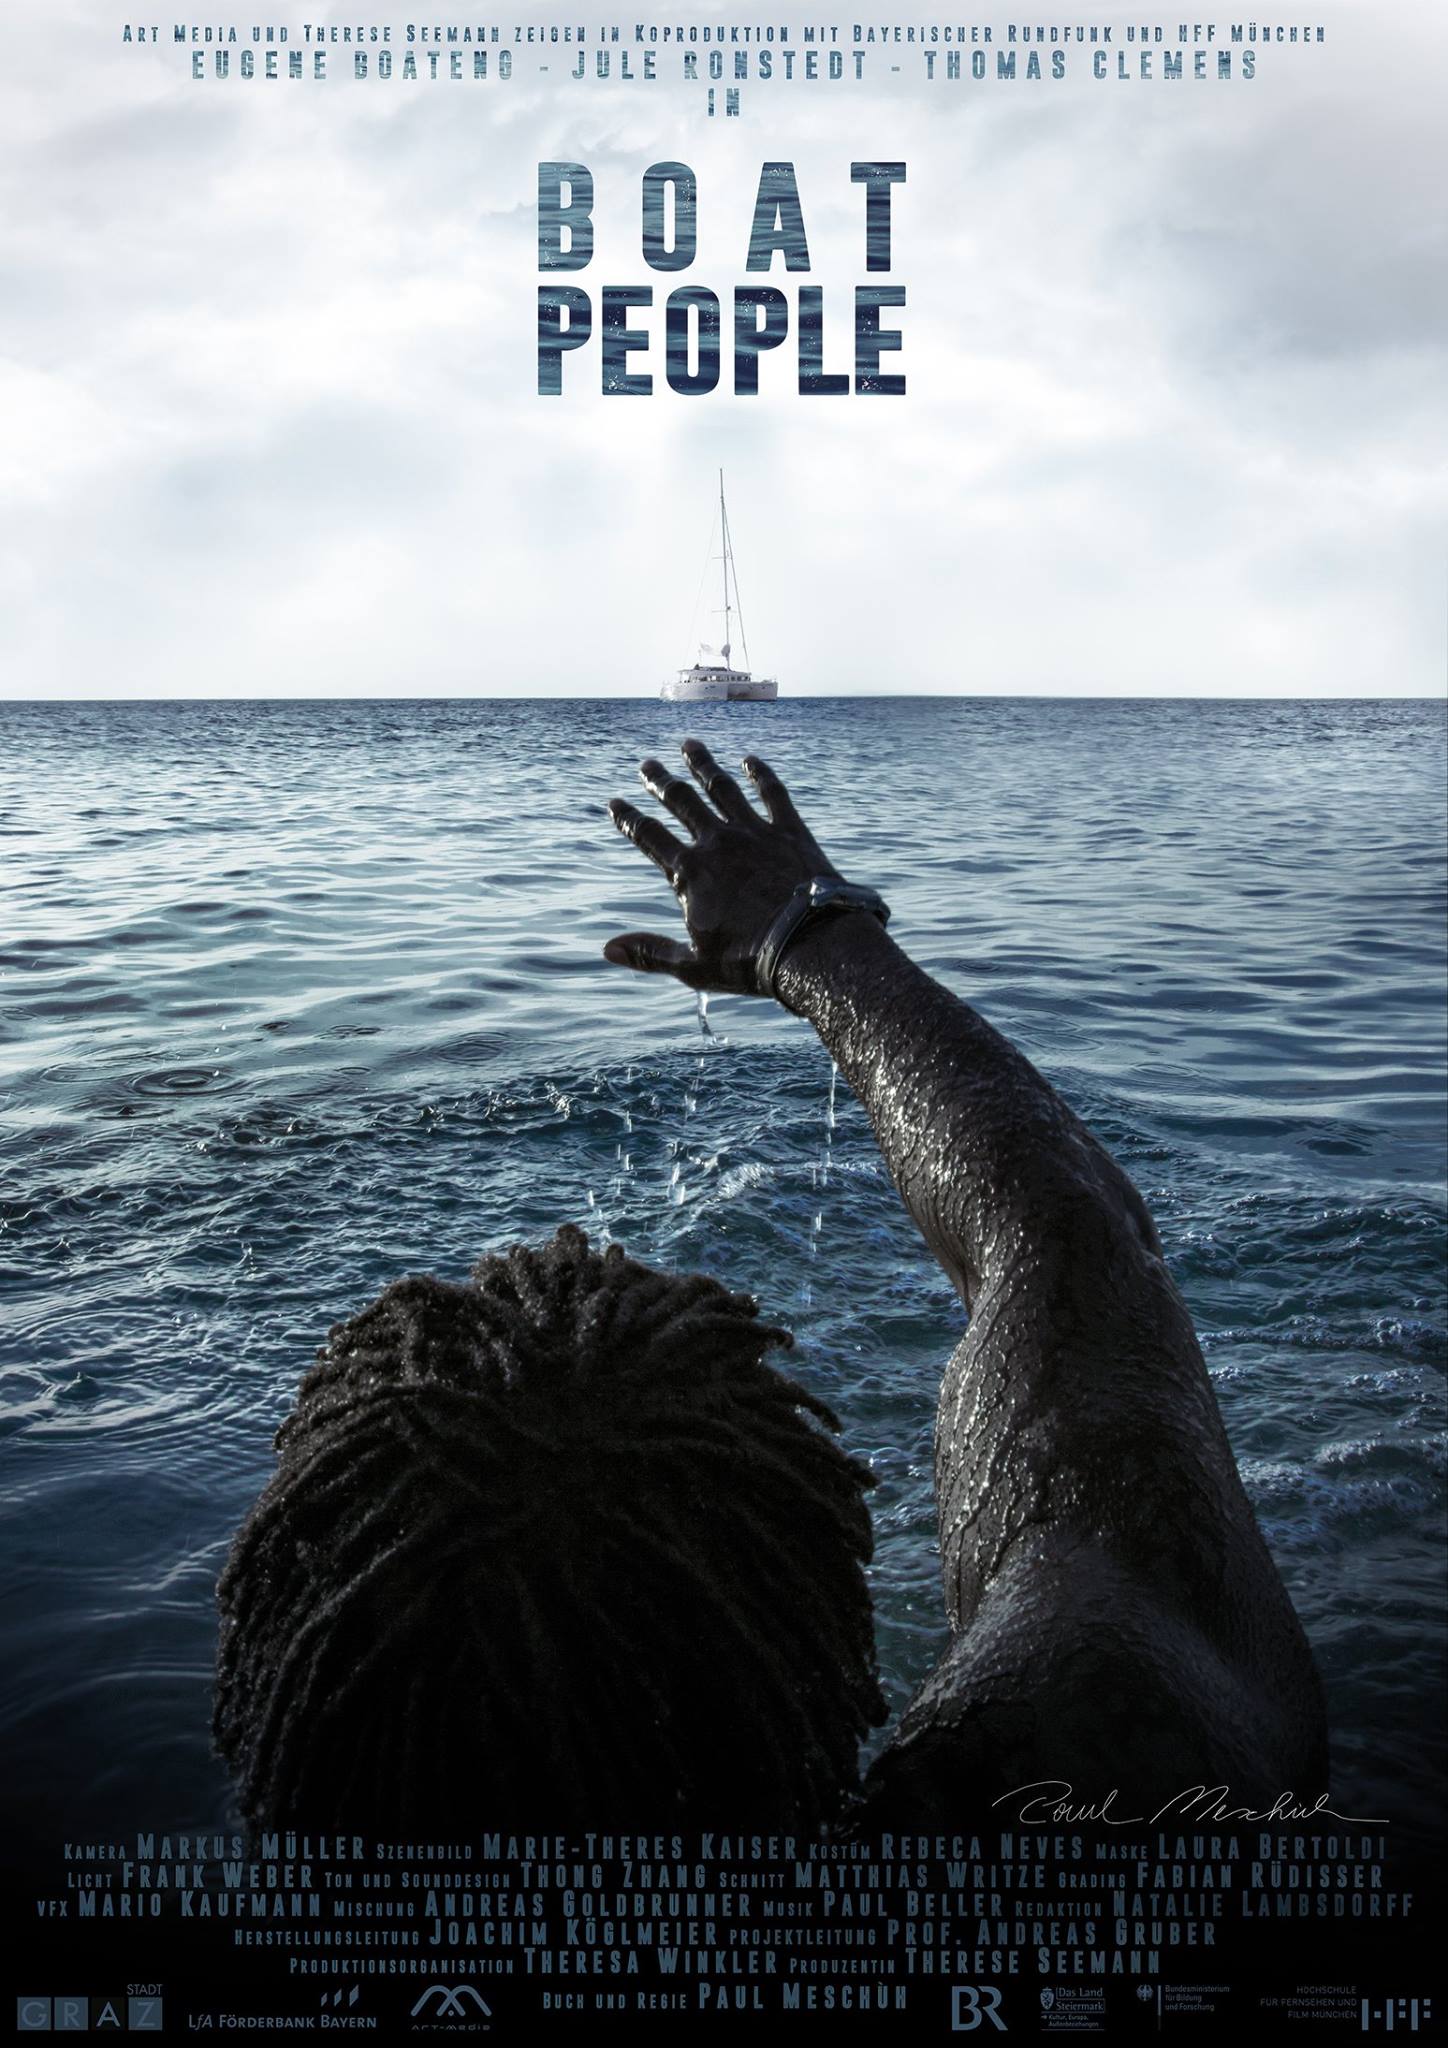 BOAT PEOPLE